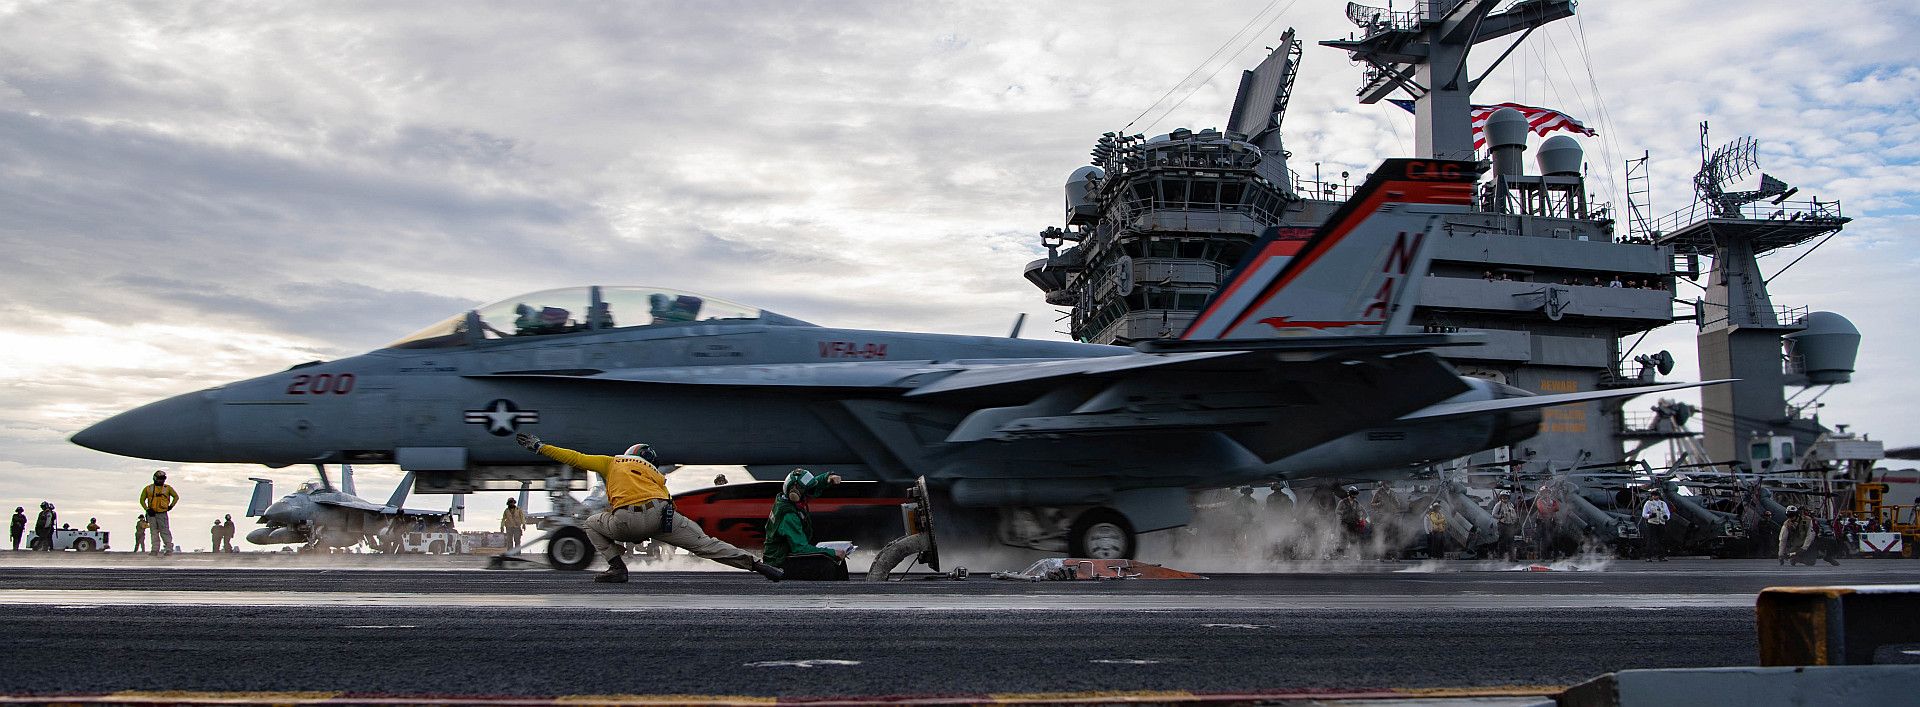  Launches Off The Flight Deck Of The Aircraft Carrier USS Nimitz